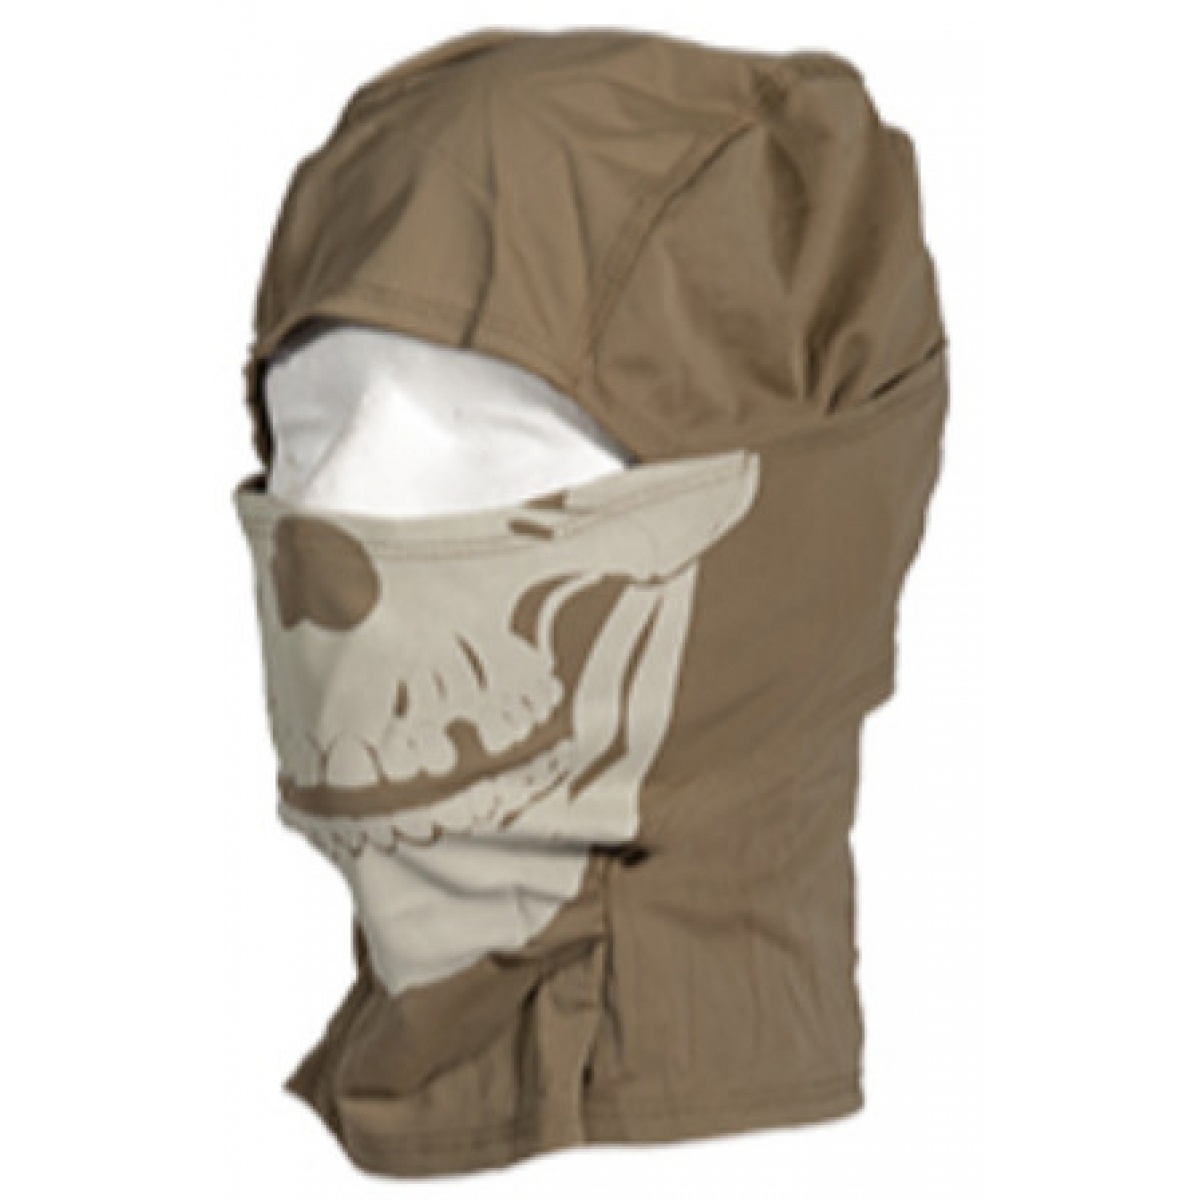 Ghost Mask With Balaclava Completely Handmade. Also -  UK